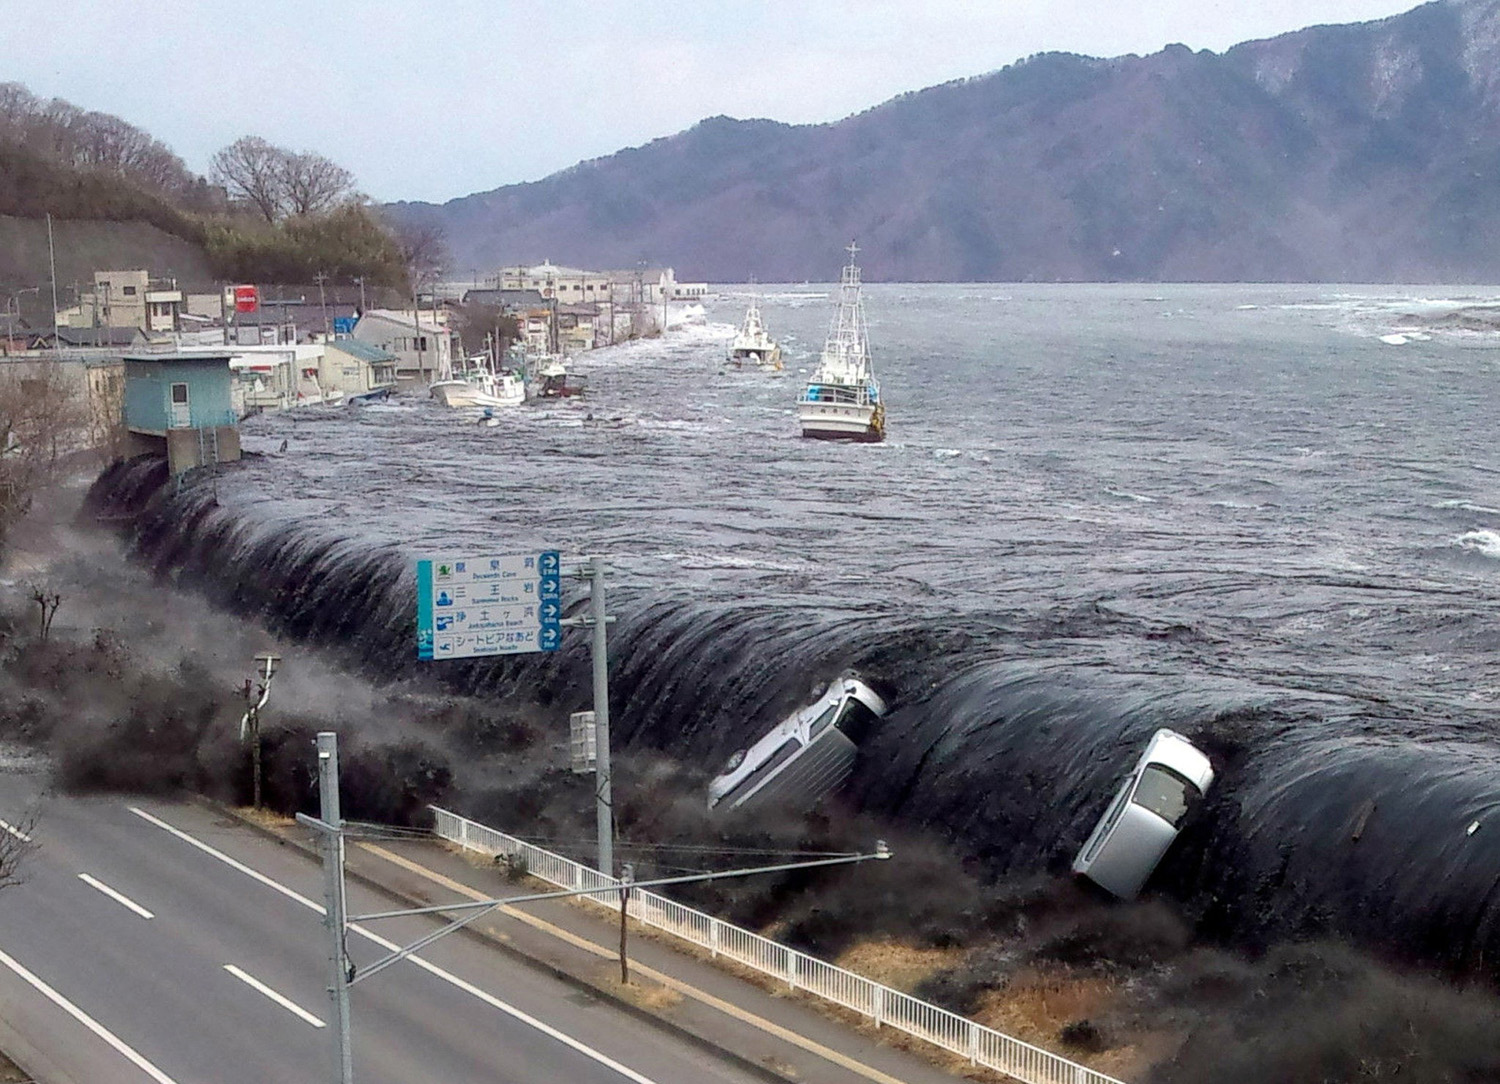 Picture taken by a Miyako City official shows a tsunami breeching an embankment and flowing into the city of Miyako in Iwate prefecture shortly after a 9.0 magnitude earthquake hit the region of northern Japan. March 11, 2011.